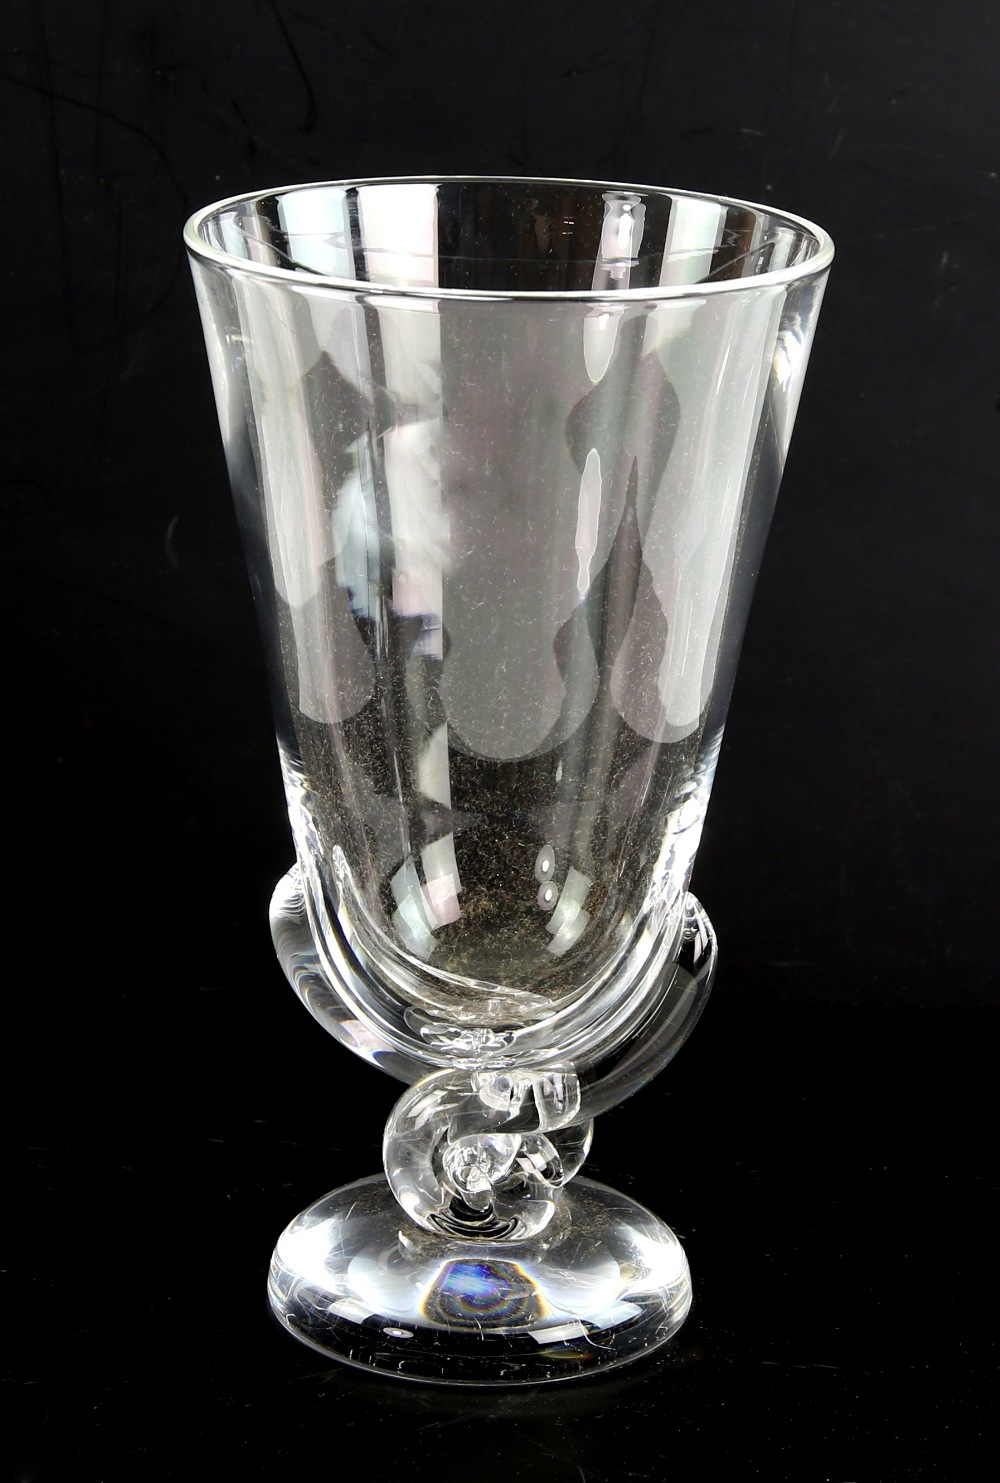 Modern Steuben glass vase on swirl supports and round foot, 23cm high,.